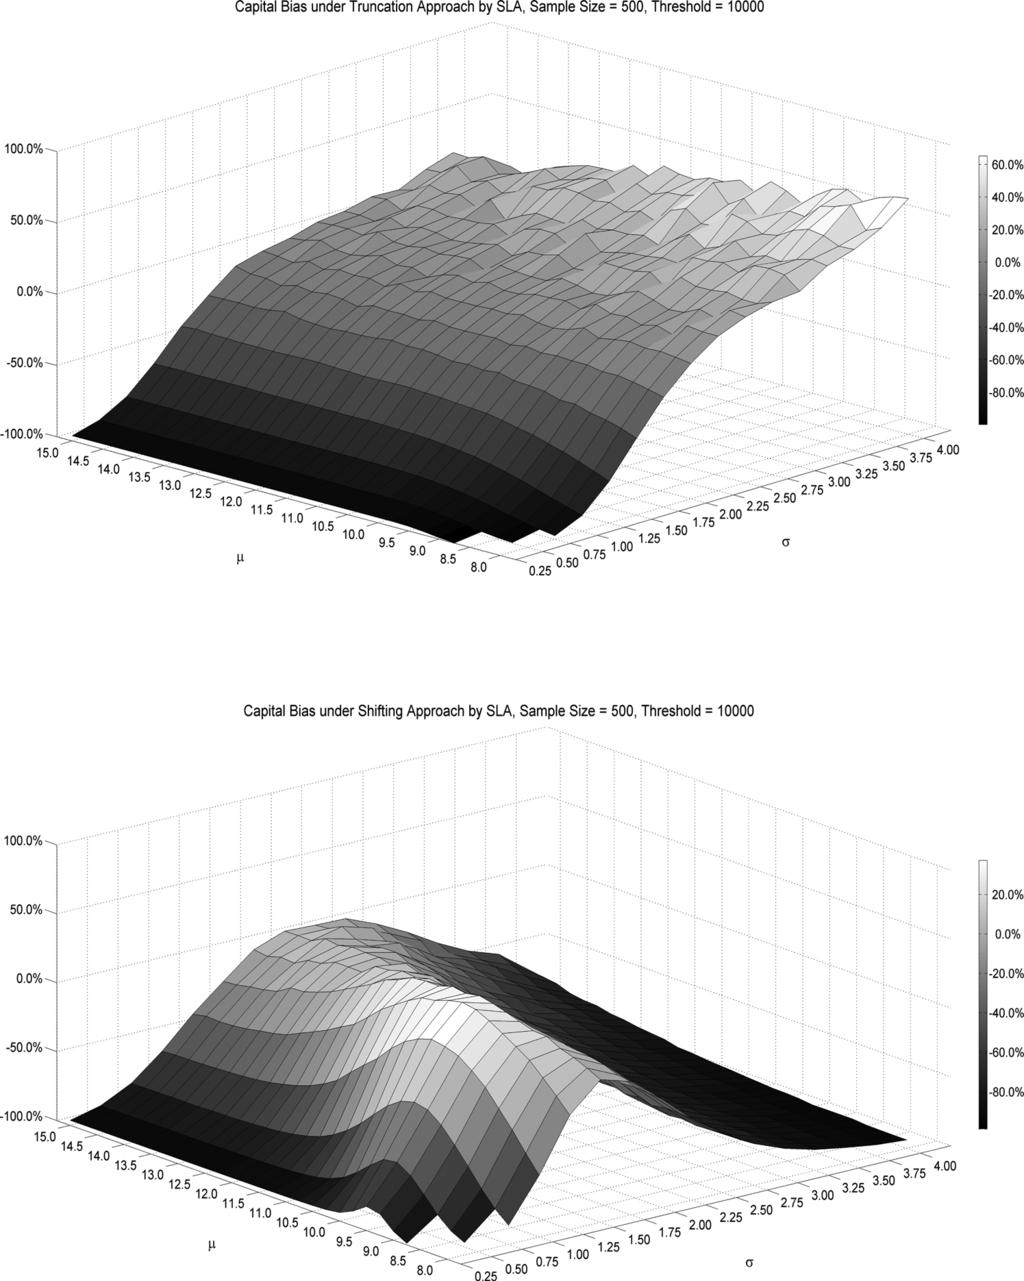 Estimation of Truncated Data Samples in Operational Risk Modeling 621 Figure 1 The Single Loss Approximation SLA) to Capital Proposed by Böcker and Klüppelberg 2005) Is Used to Approximate the Bias